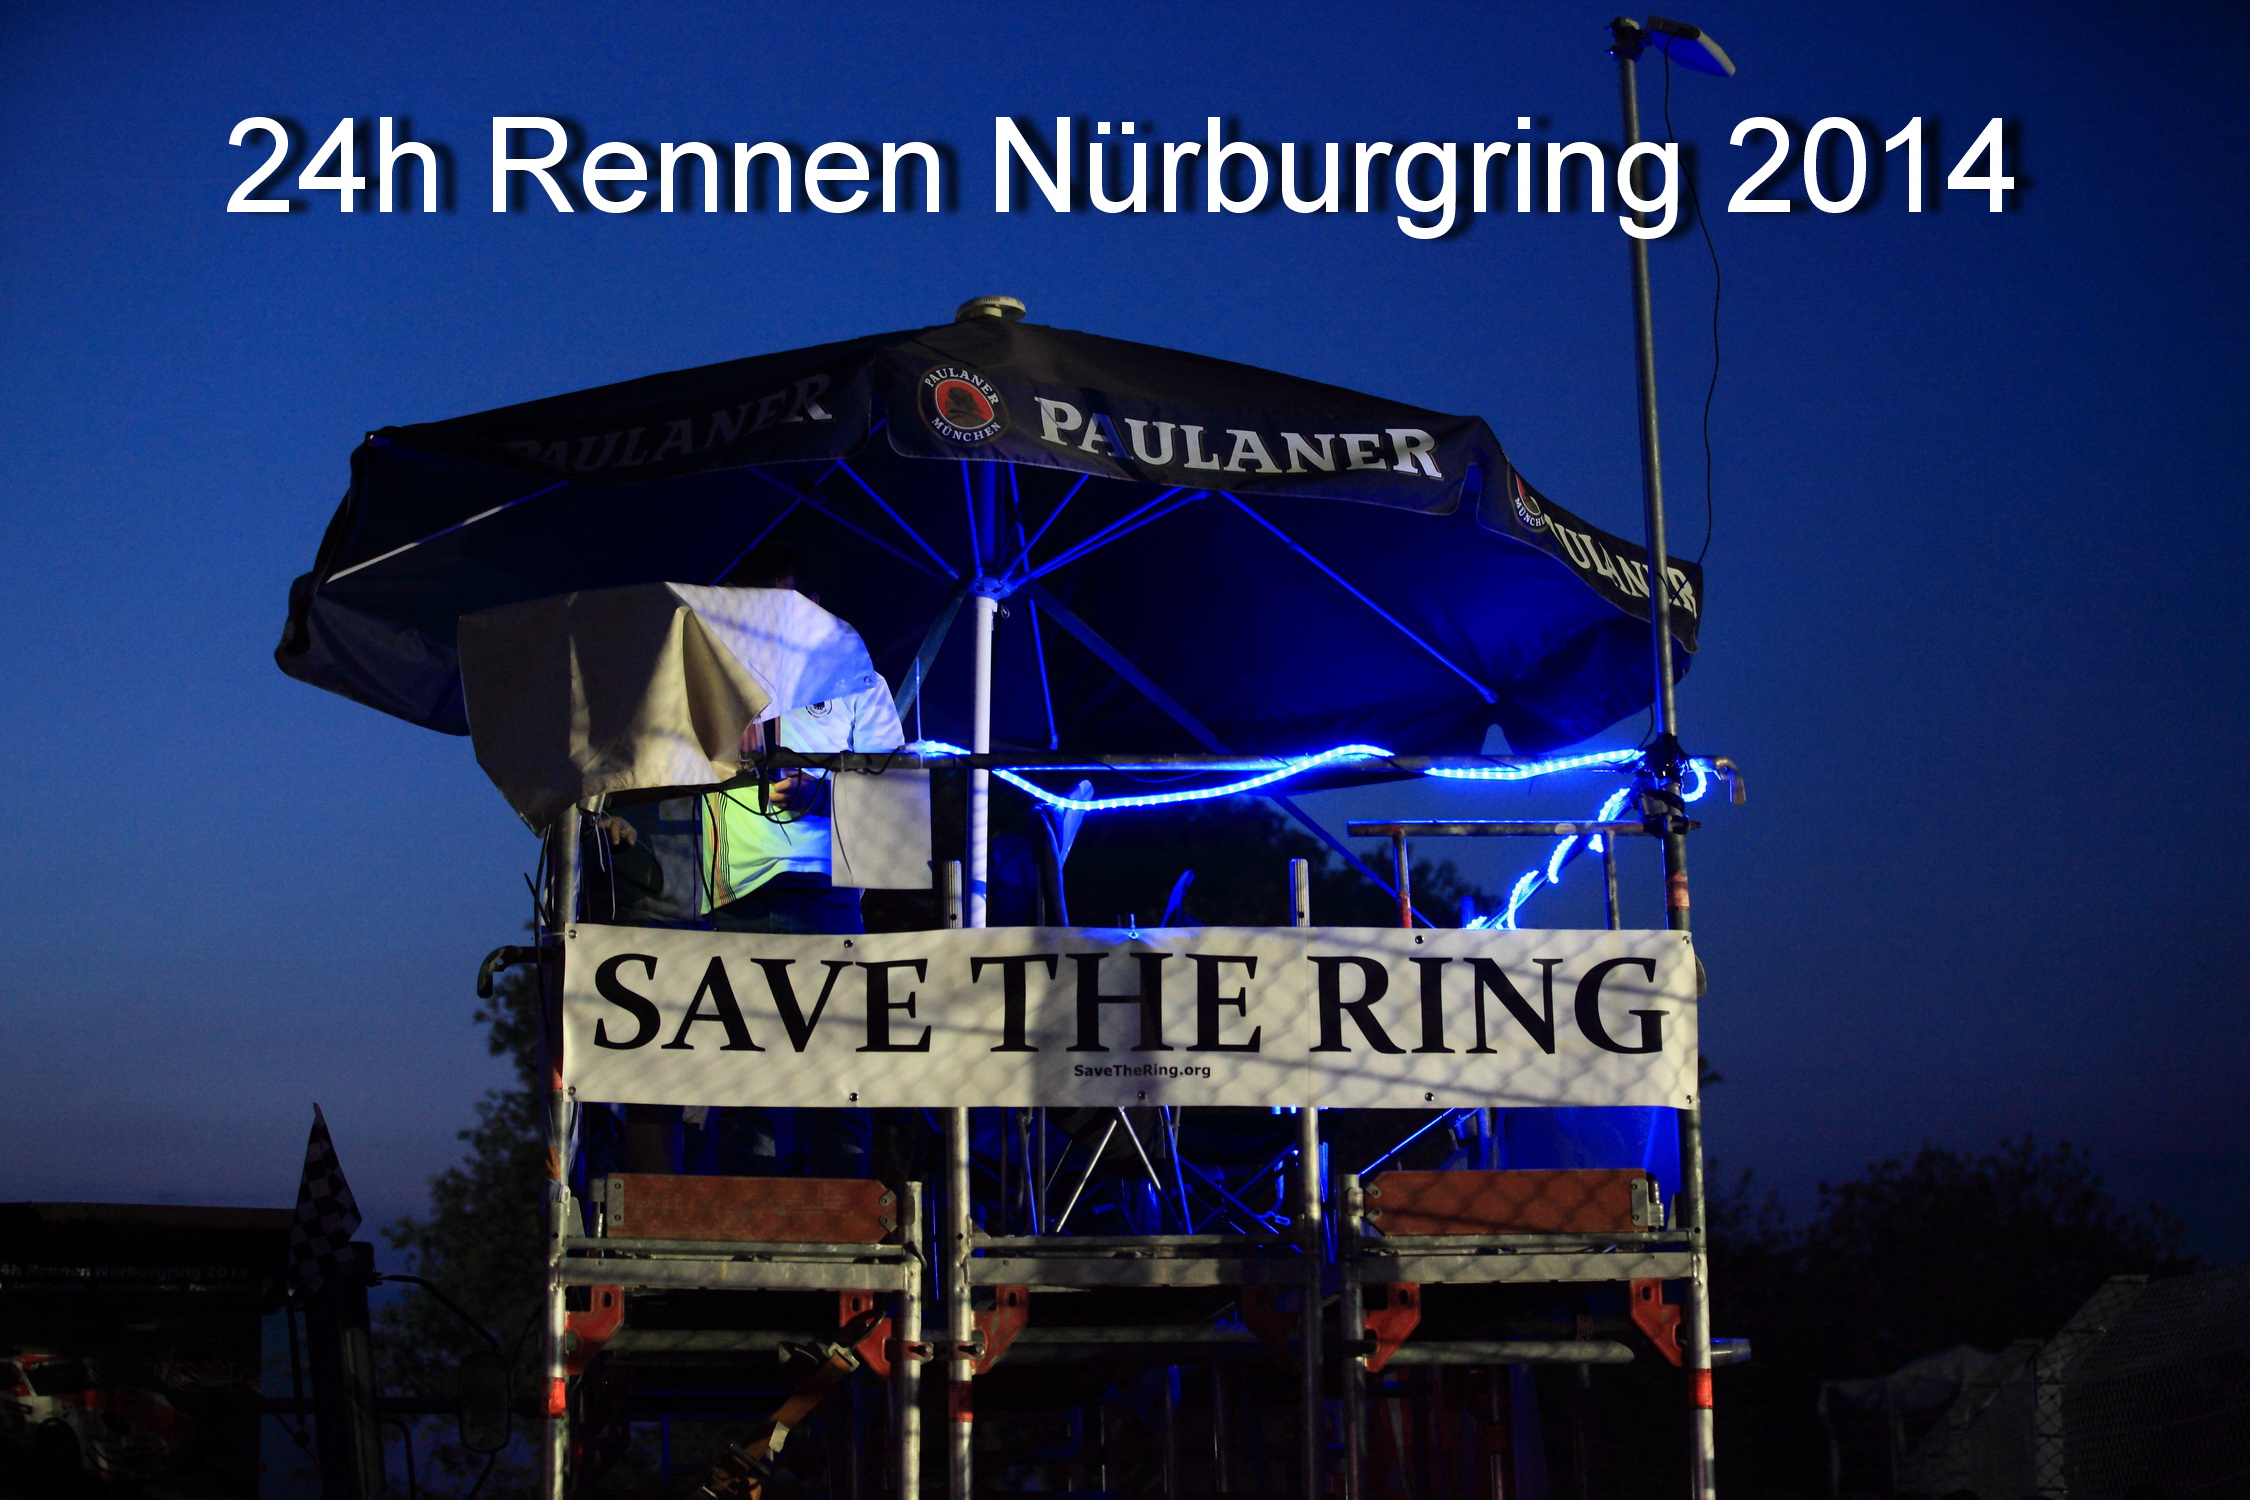 SAVE THE RING!